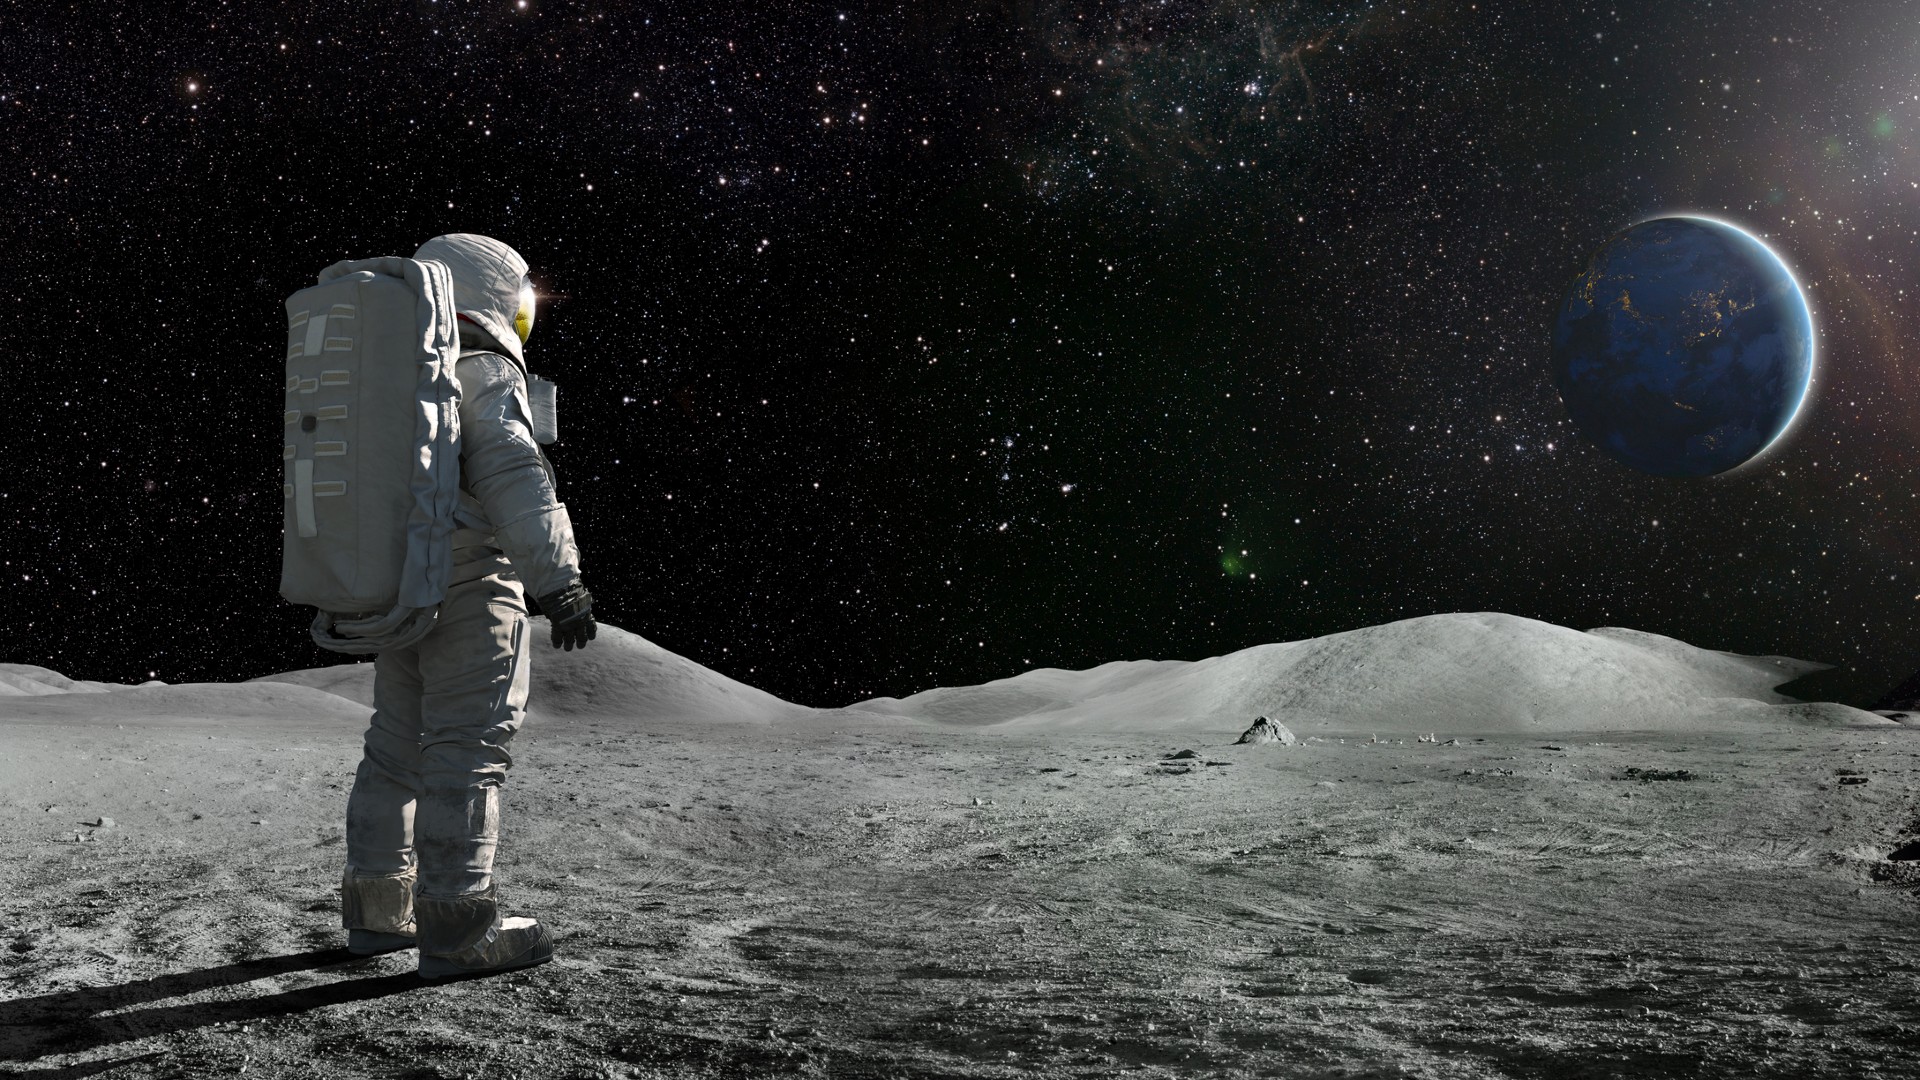 Astronauts on the moon could stay fit by running in a Wheel of Death